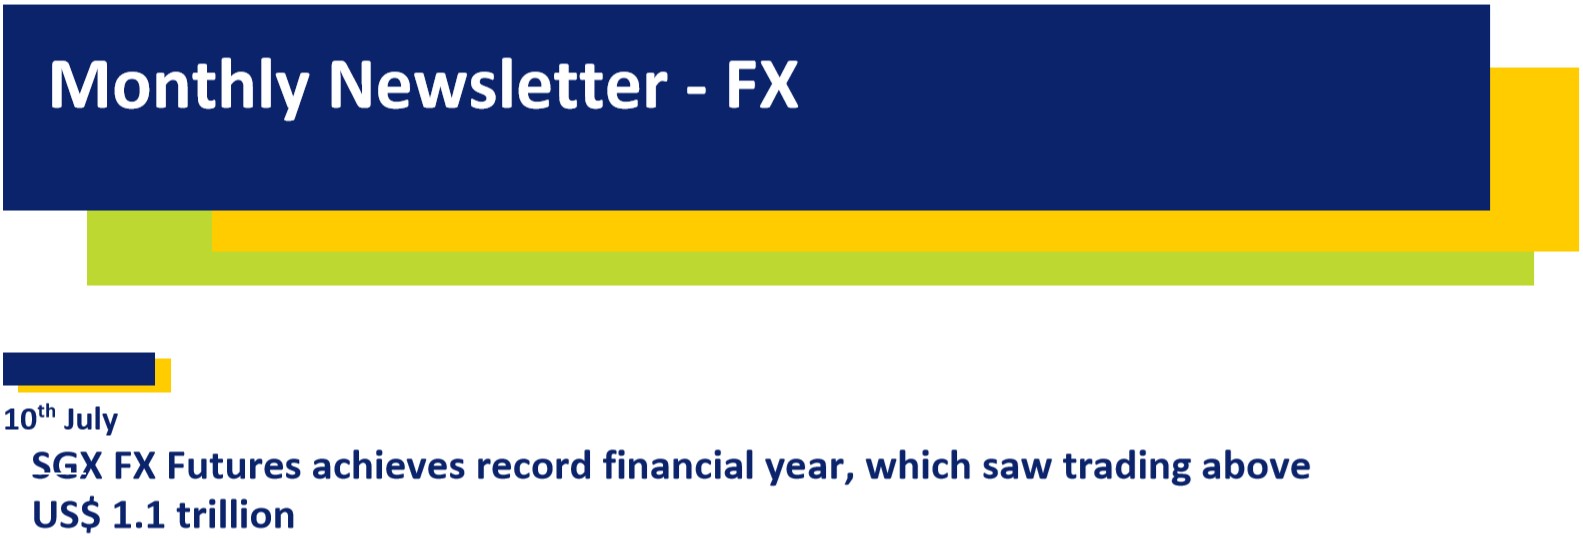 Three narrow rectangles, layered and offset: lime green bottom rear, golden yellow middle right, navy blue top right.  In the blue box, the words "Monthly Newsletter - FX"